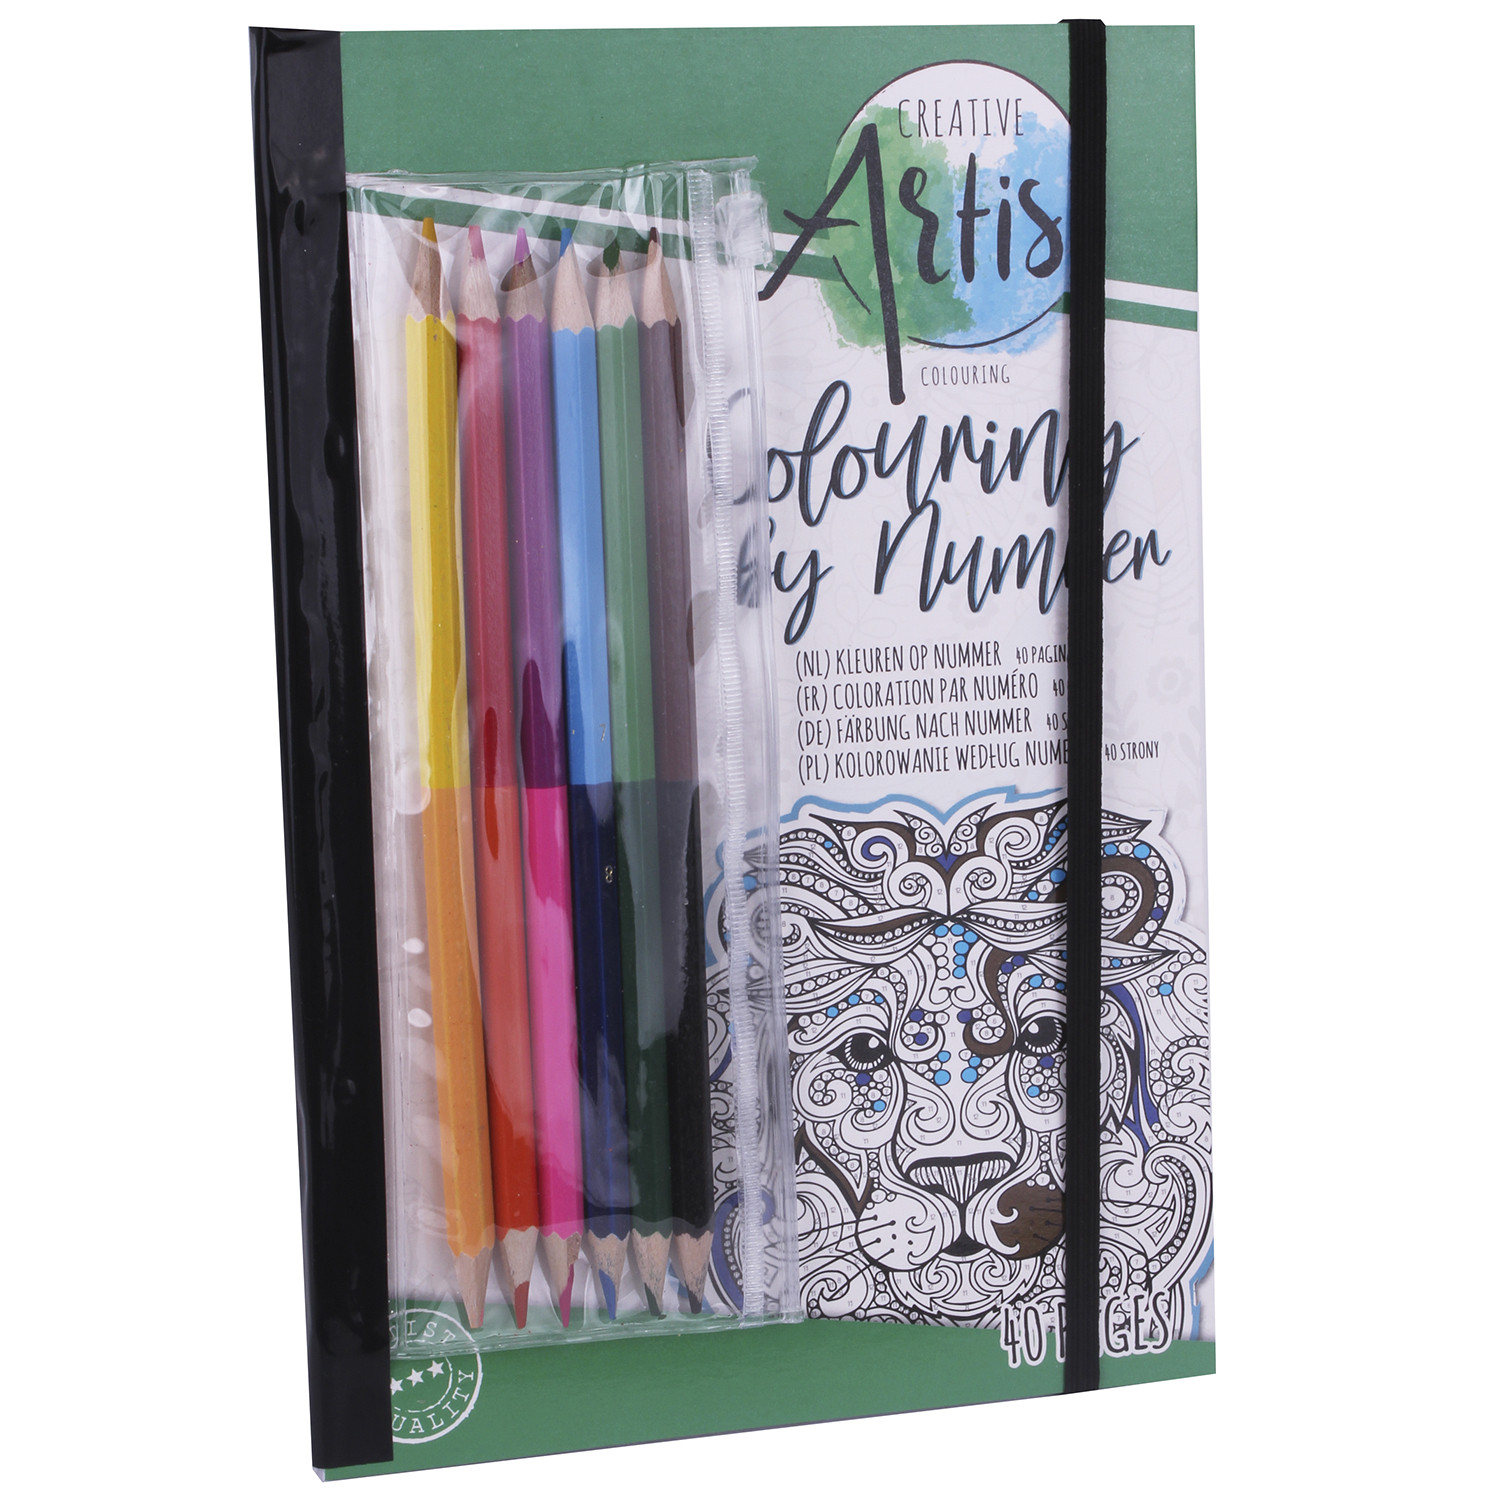 Single CRAFT Sensations Colouring By Number Book in Assorted styles Image 1